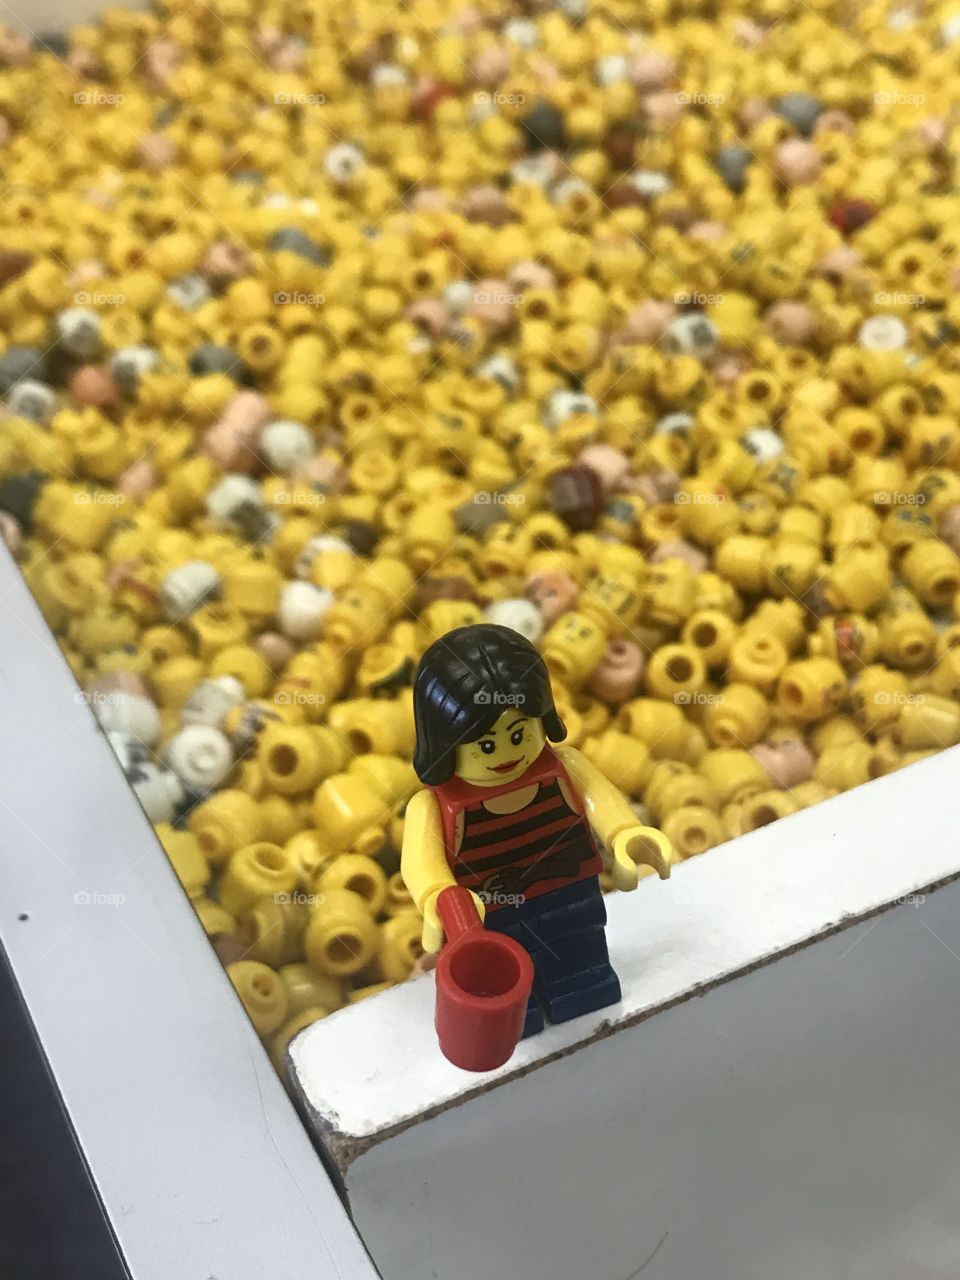 LEGO woman with coffee cup pictured in front of bin of LEGO figure heads. 